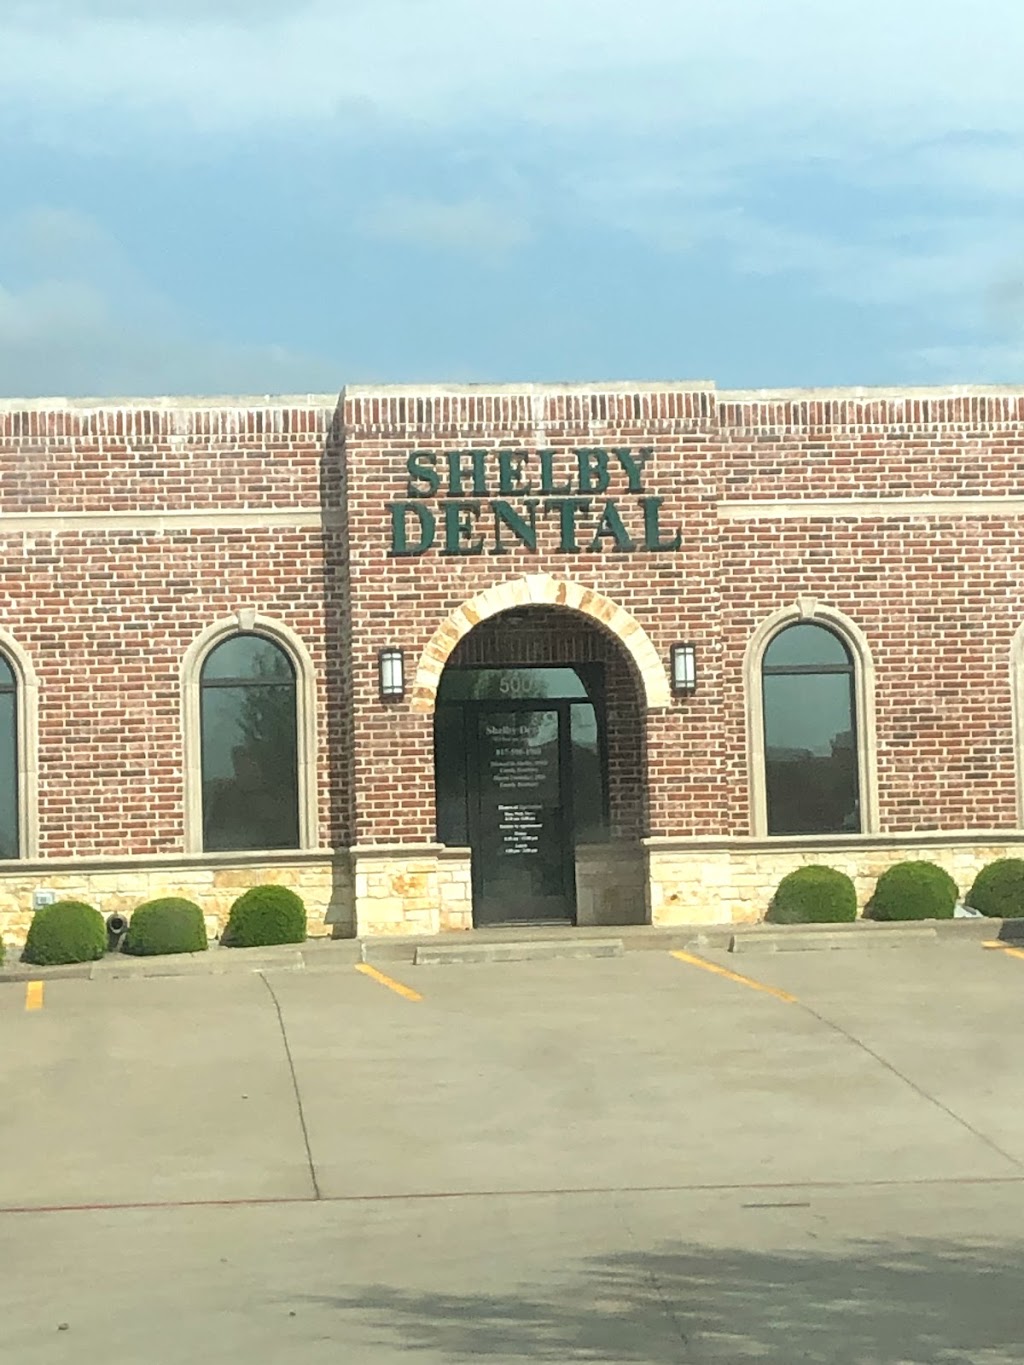 Peach Family Dentistry | 2035 Fort Worth Hwy #500, Weatherford, TX 76086 | Phone: (817) 598-1900